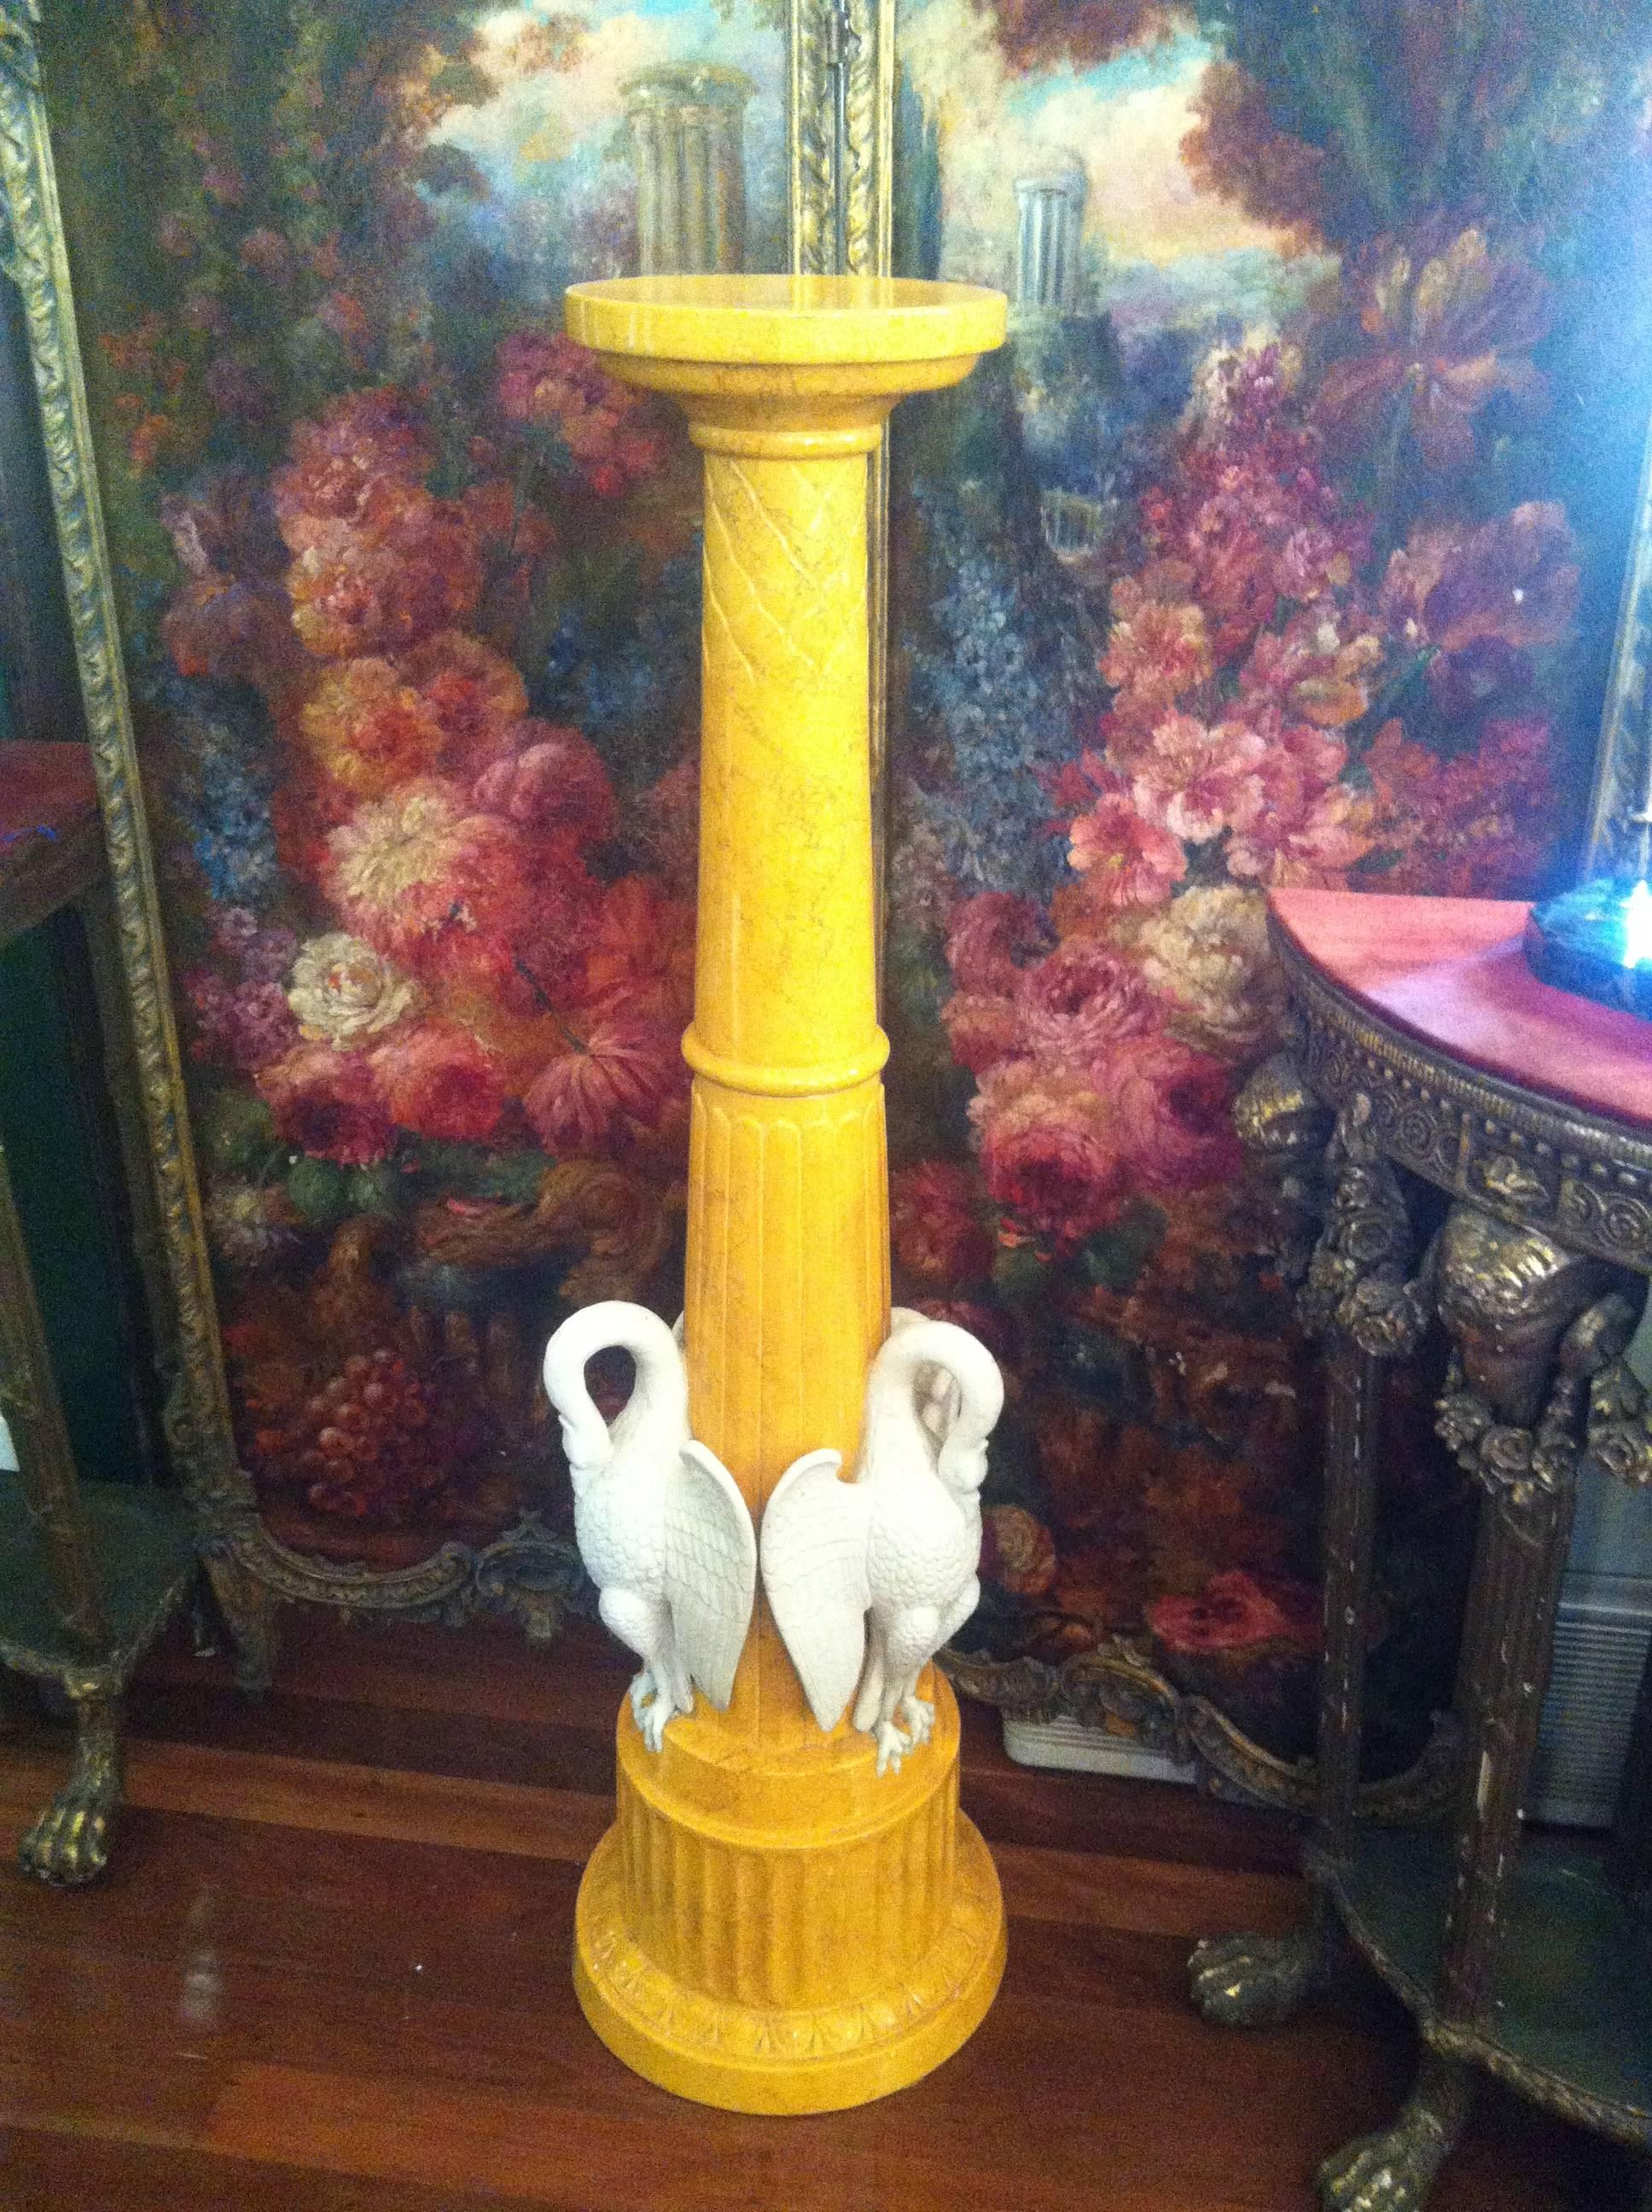 An unusual and rare piece of porcelain by the famed English pottery company Spode. The moulded porcelain column is accentuated by three felspar swans, and is stamped with the Copeland and Garrett mark used on china and earthenware between 1838 and